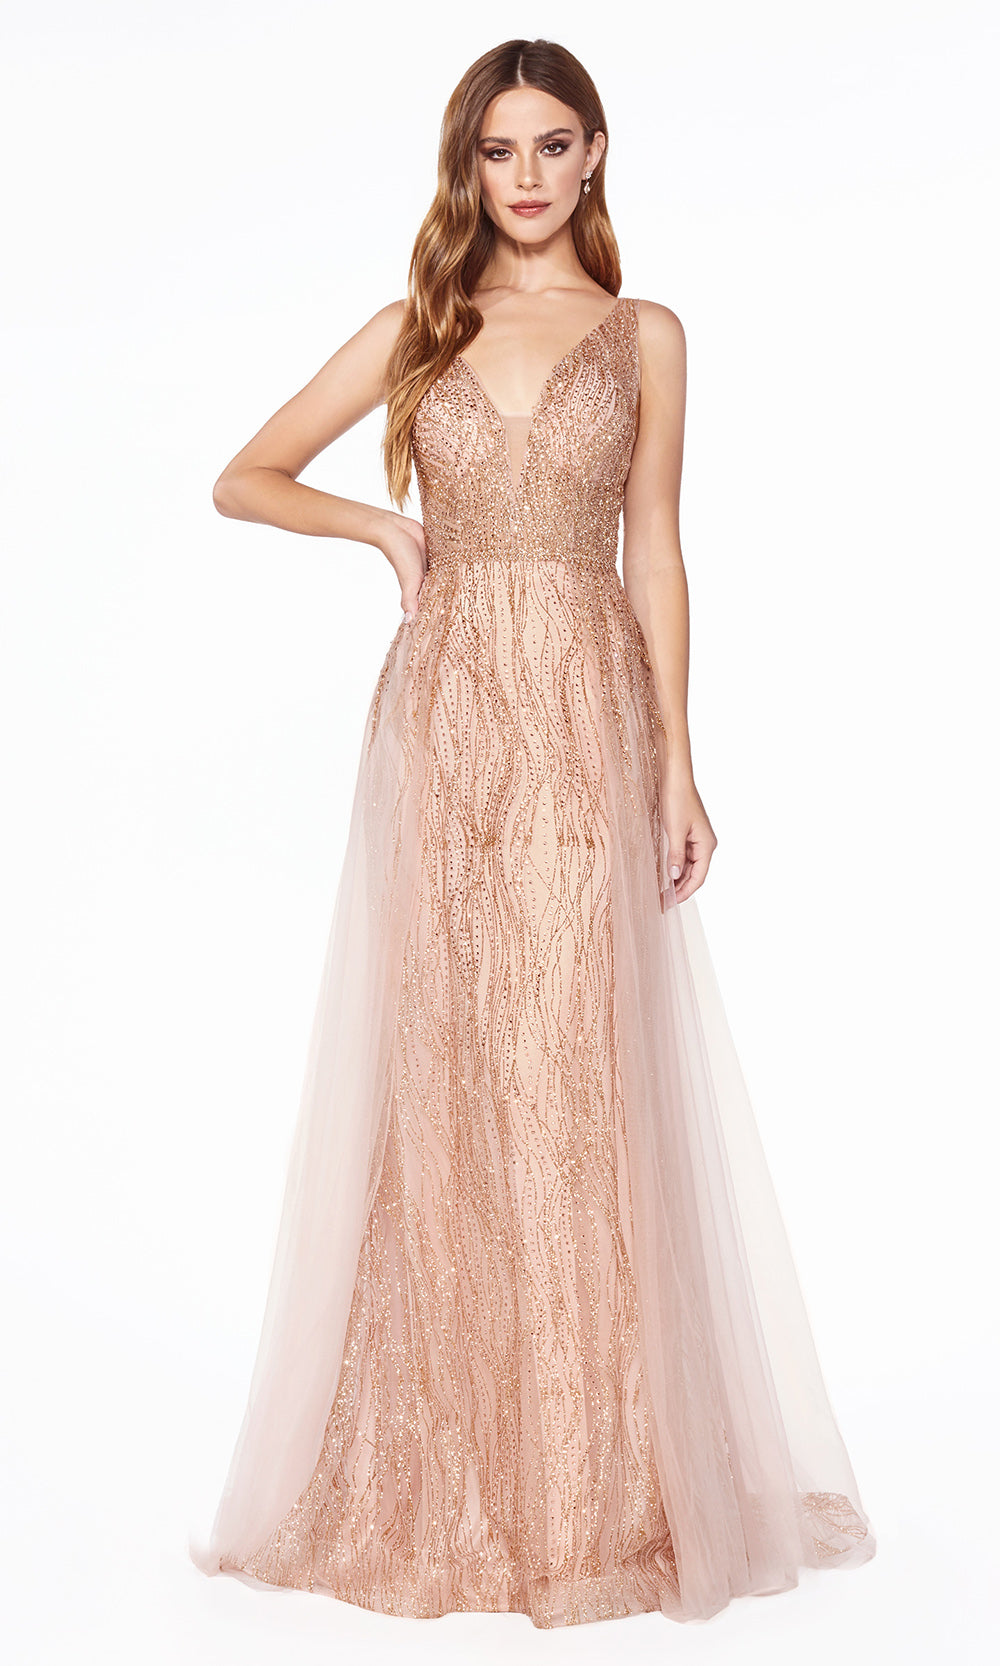 Ladivine CD0152 rose gold v neck dress wide straps skirt overlay Perfect rose gold dress for prom bridesmaids formal wedding guest dress gala black tie event wedding engagement reception beaded indowestern gown Plus sizes avail.jpg